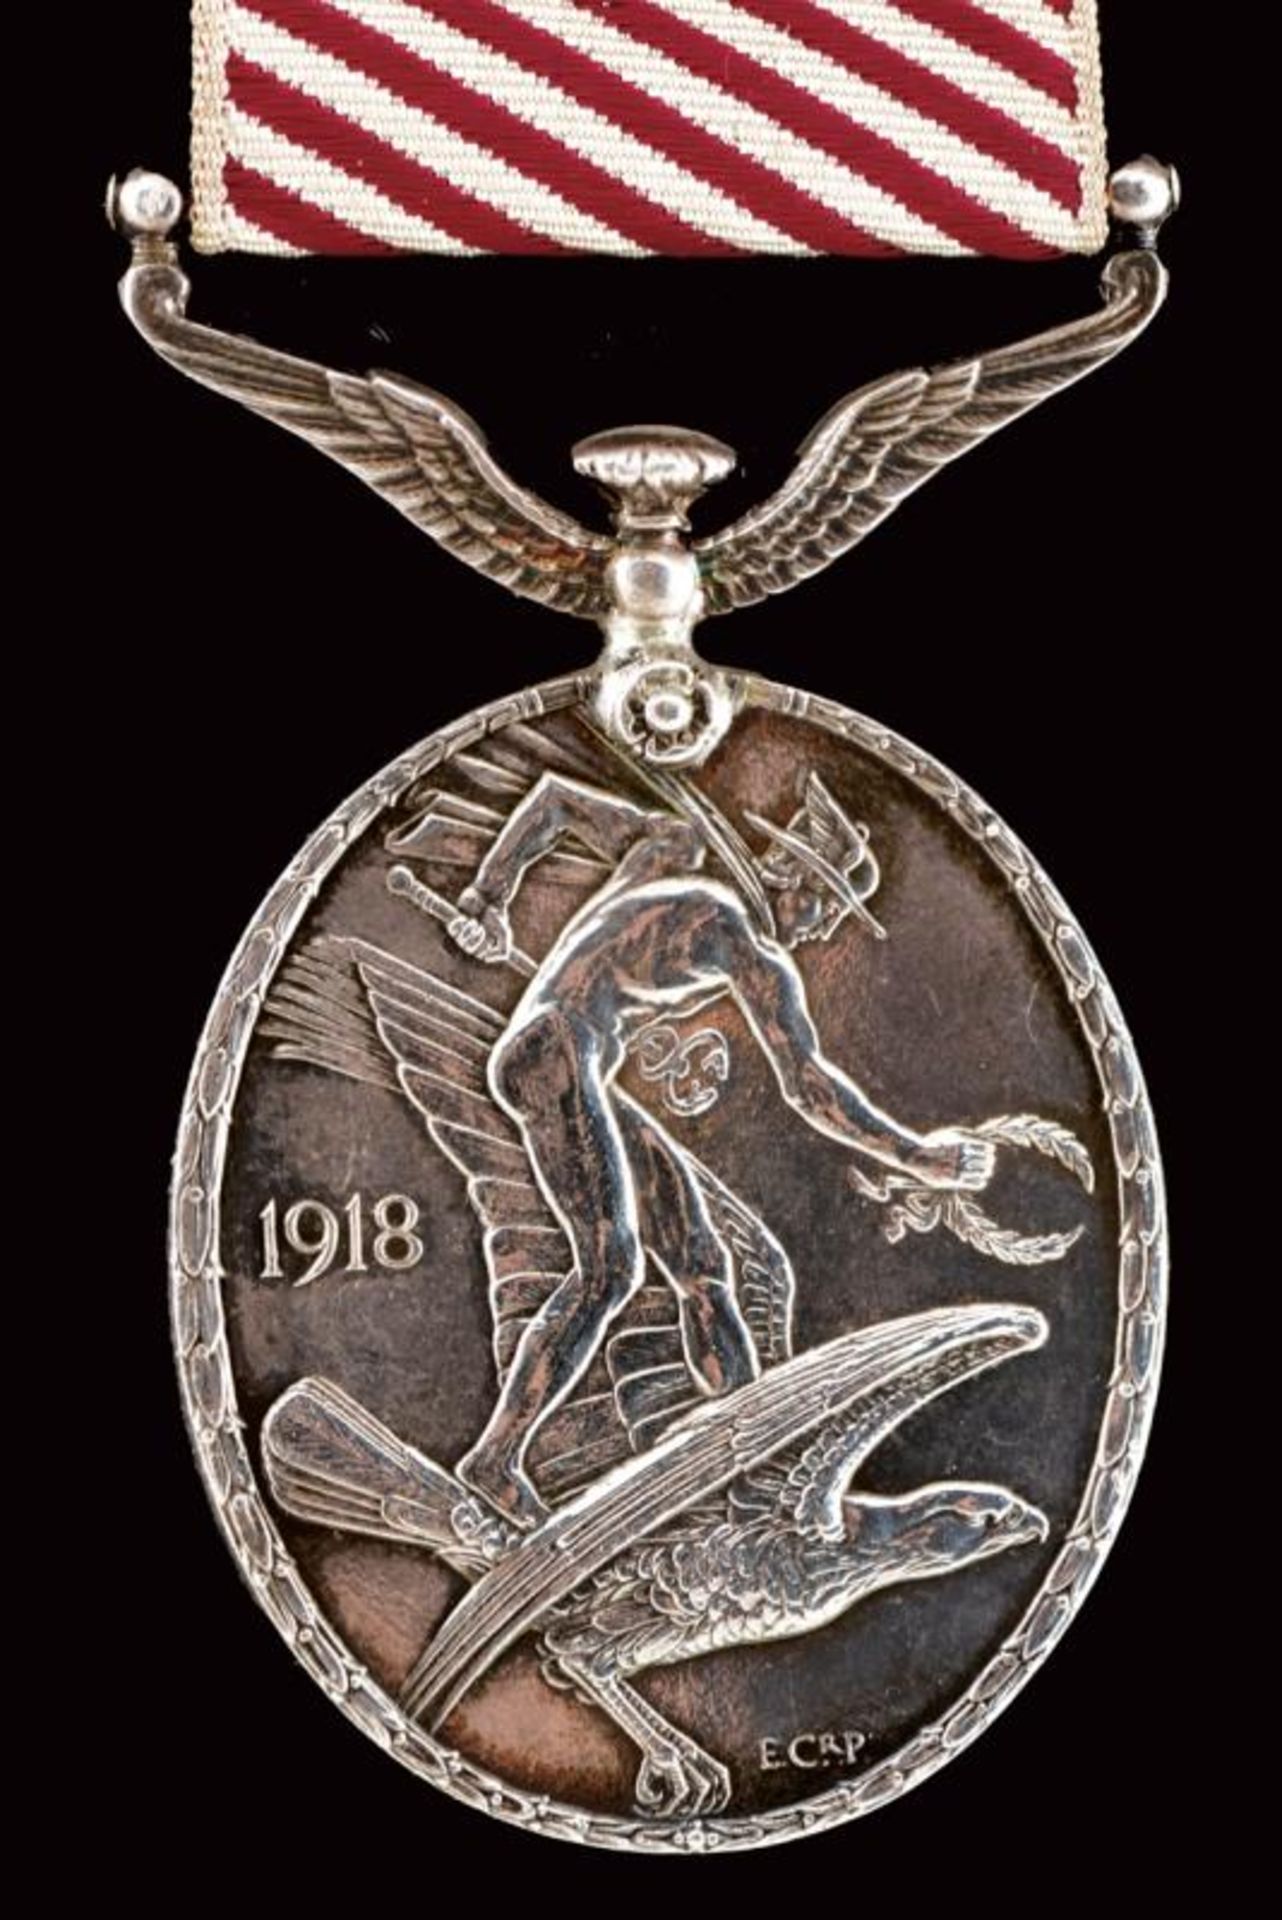 Air Force Medal - Image 3 of 3